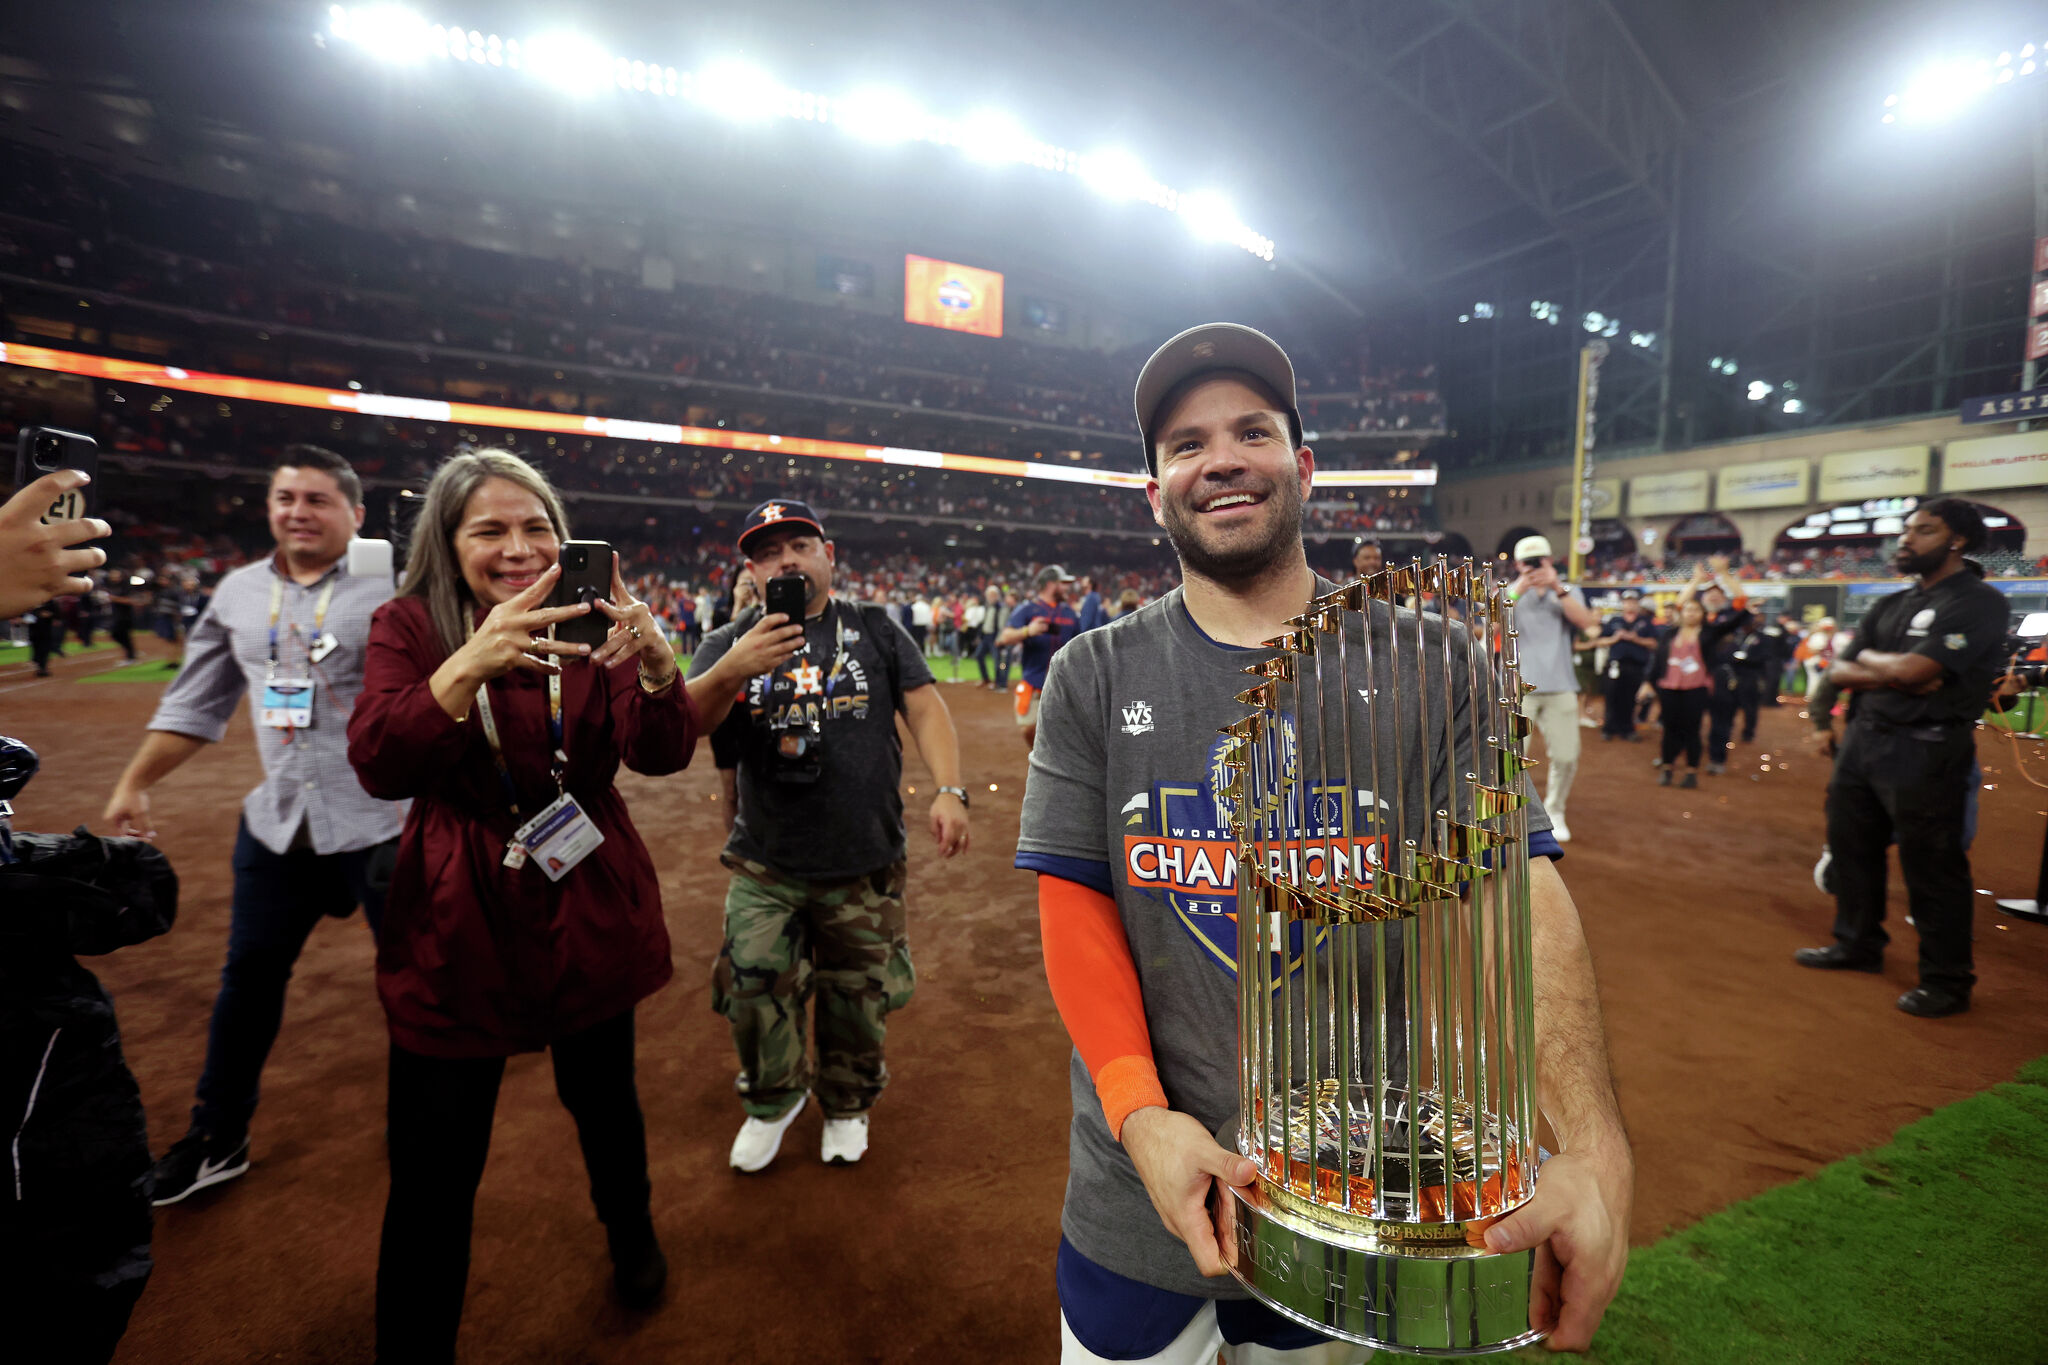 2022 Astros World Series trophy coming to Beaumont Saturday